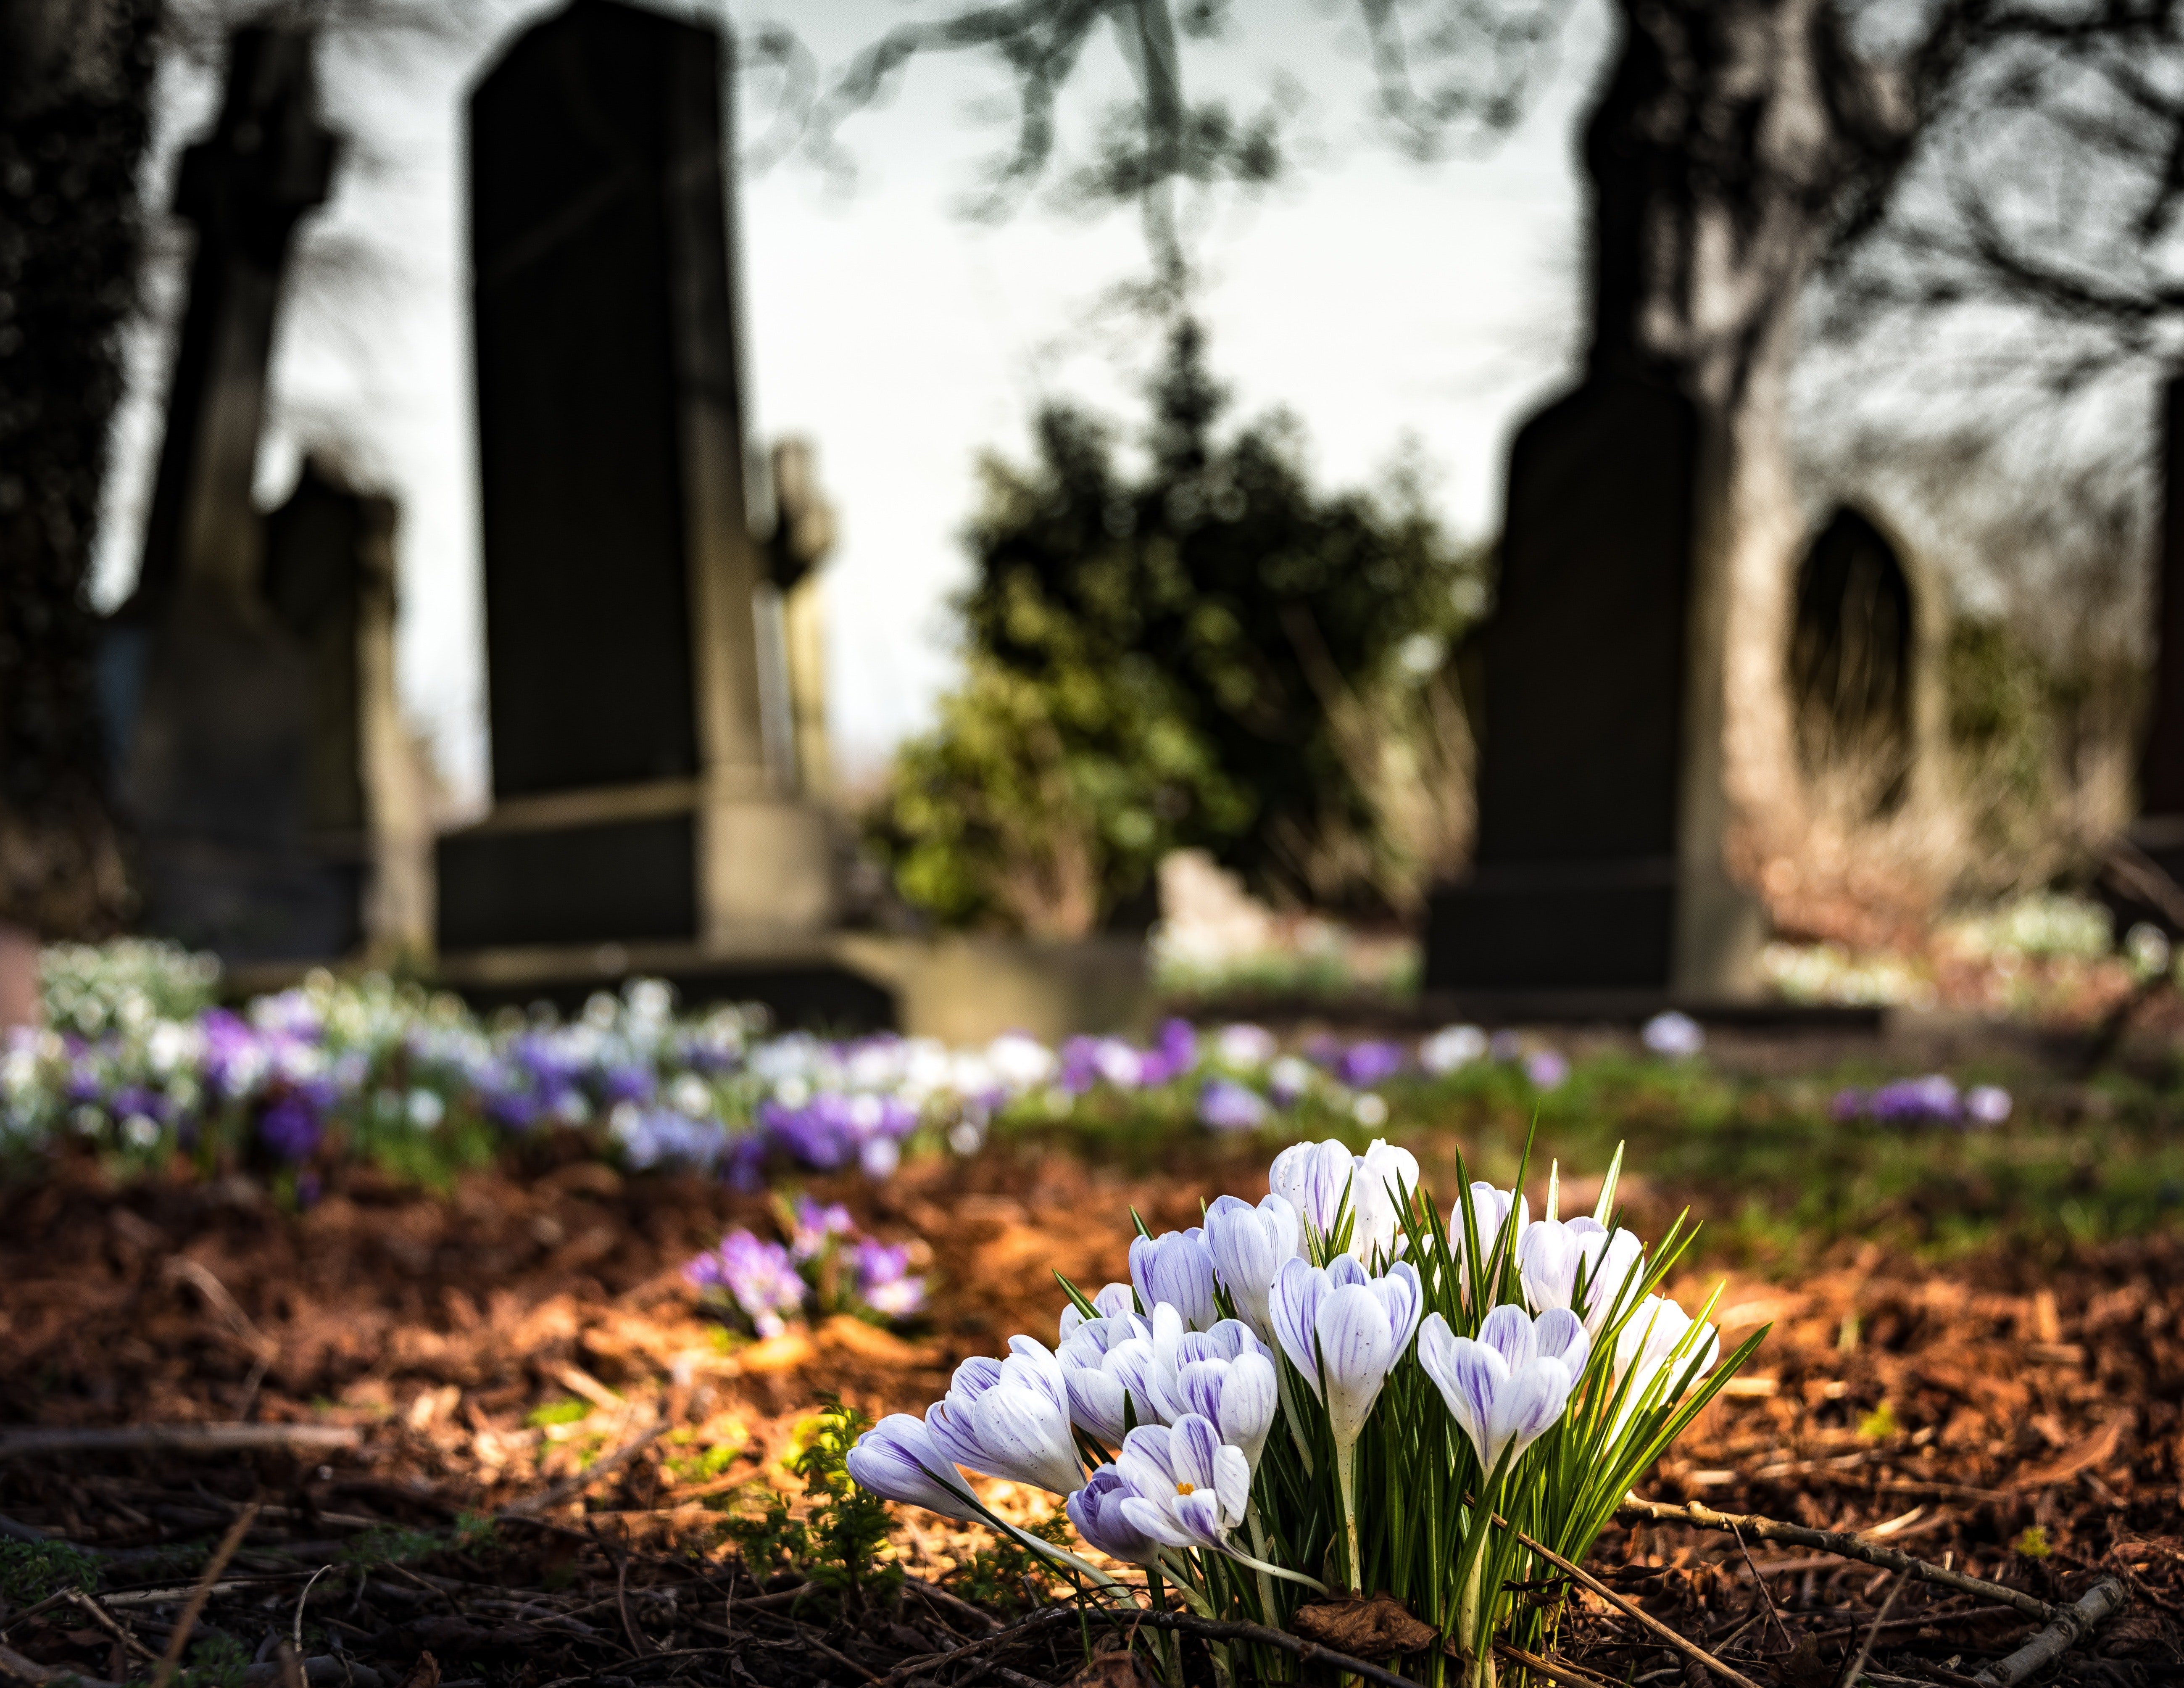 Simon and Brian laid Edward to rest at the cemetery where their dad was buried. | Source: Pexels